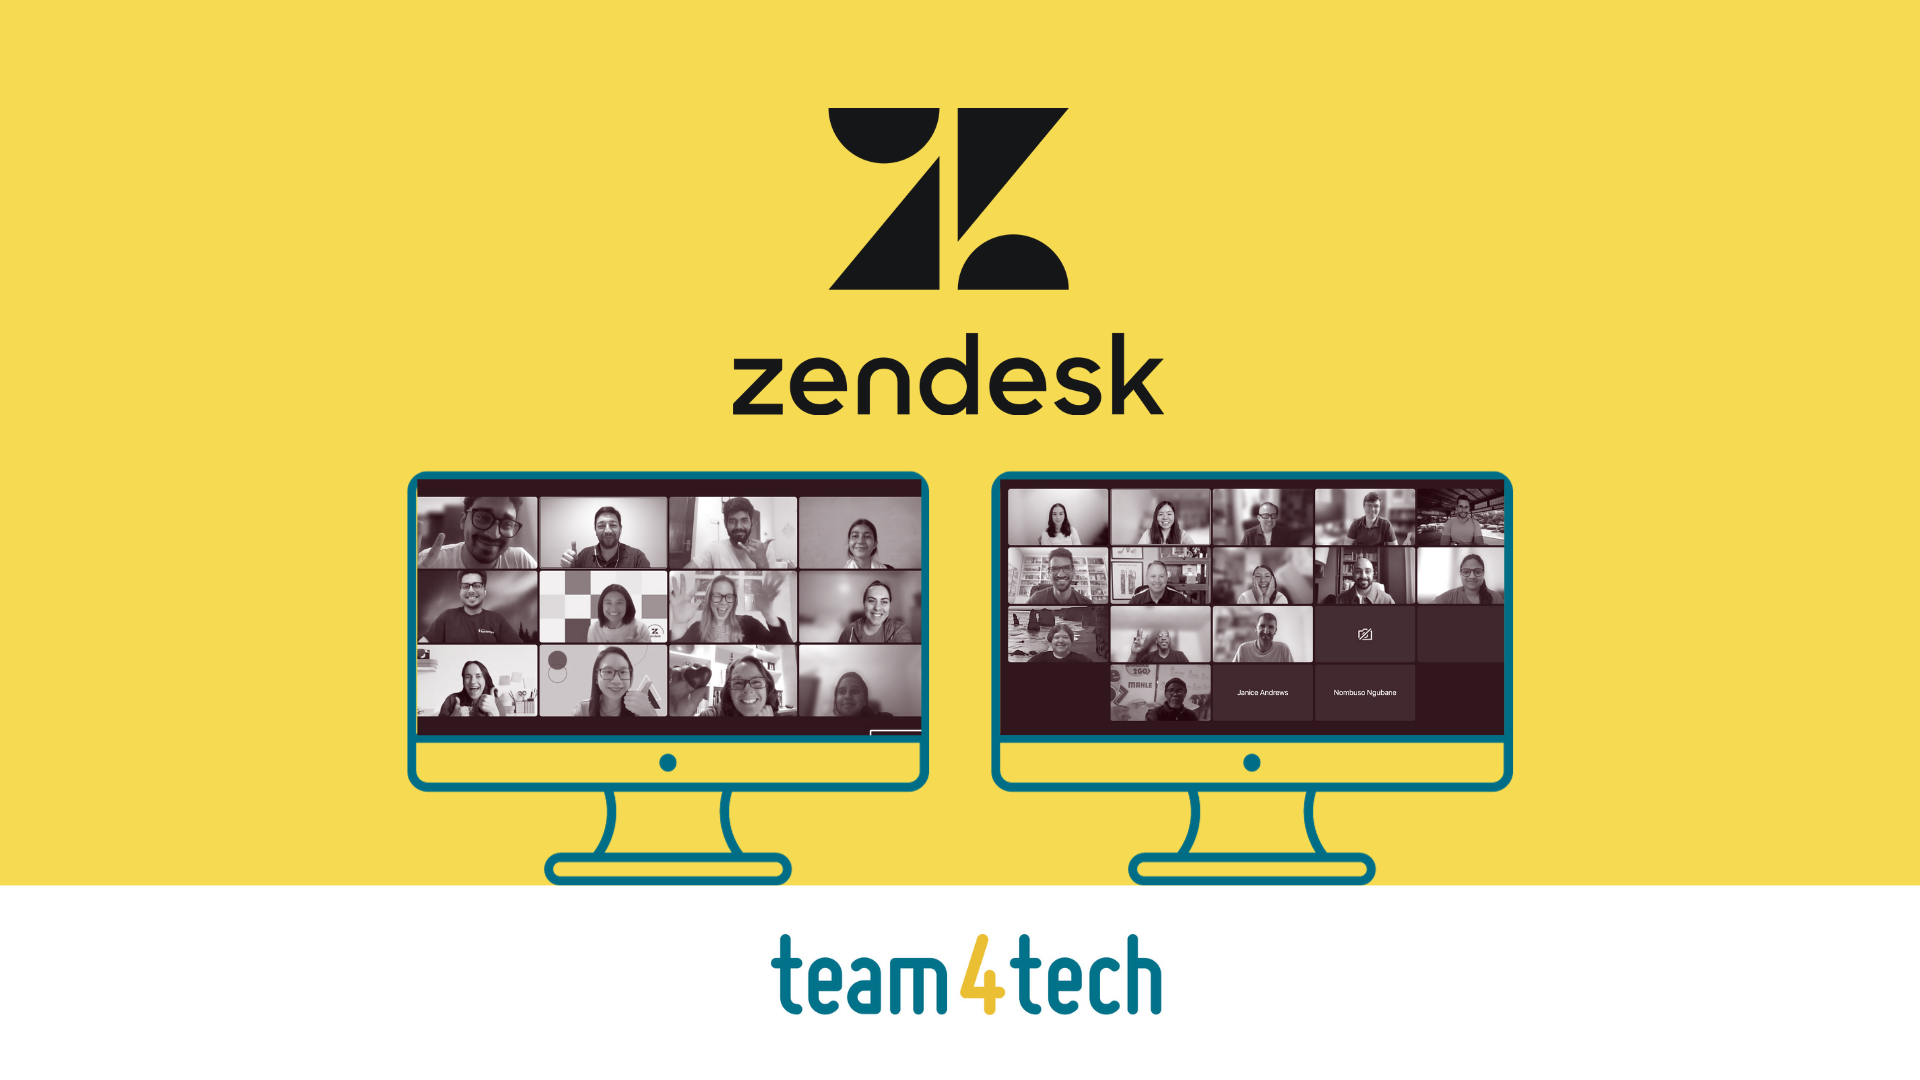 Employee Volunteers From Zendesk Impact Learners In South Africa and India